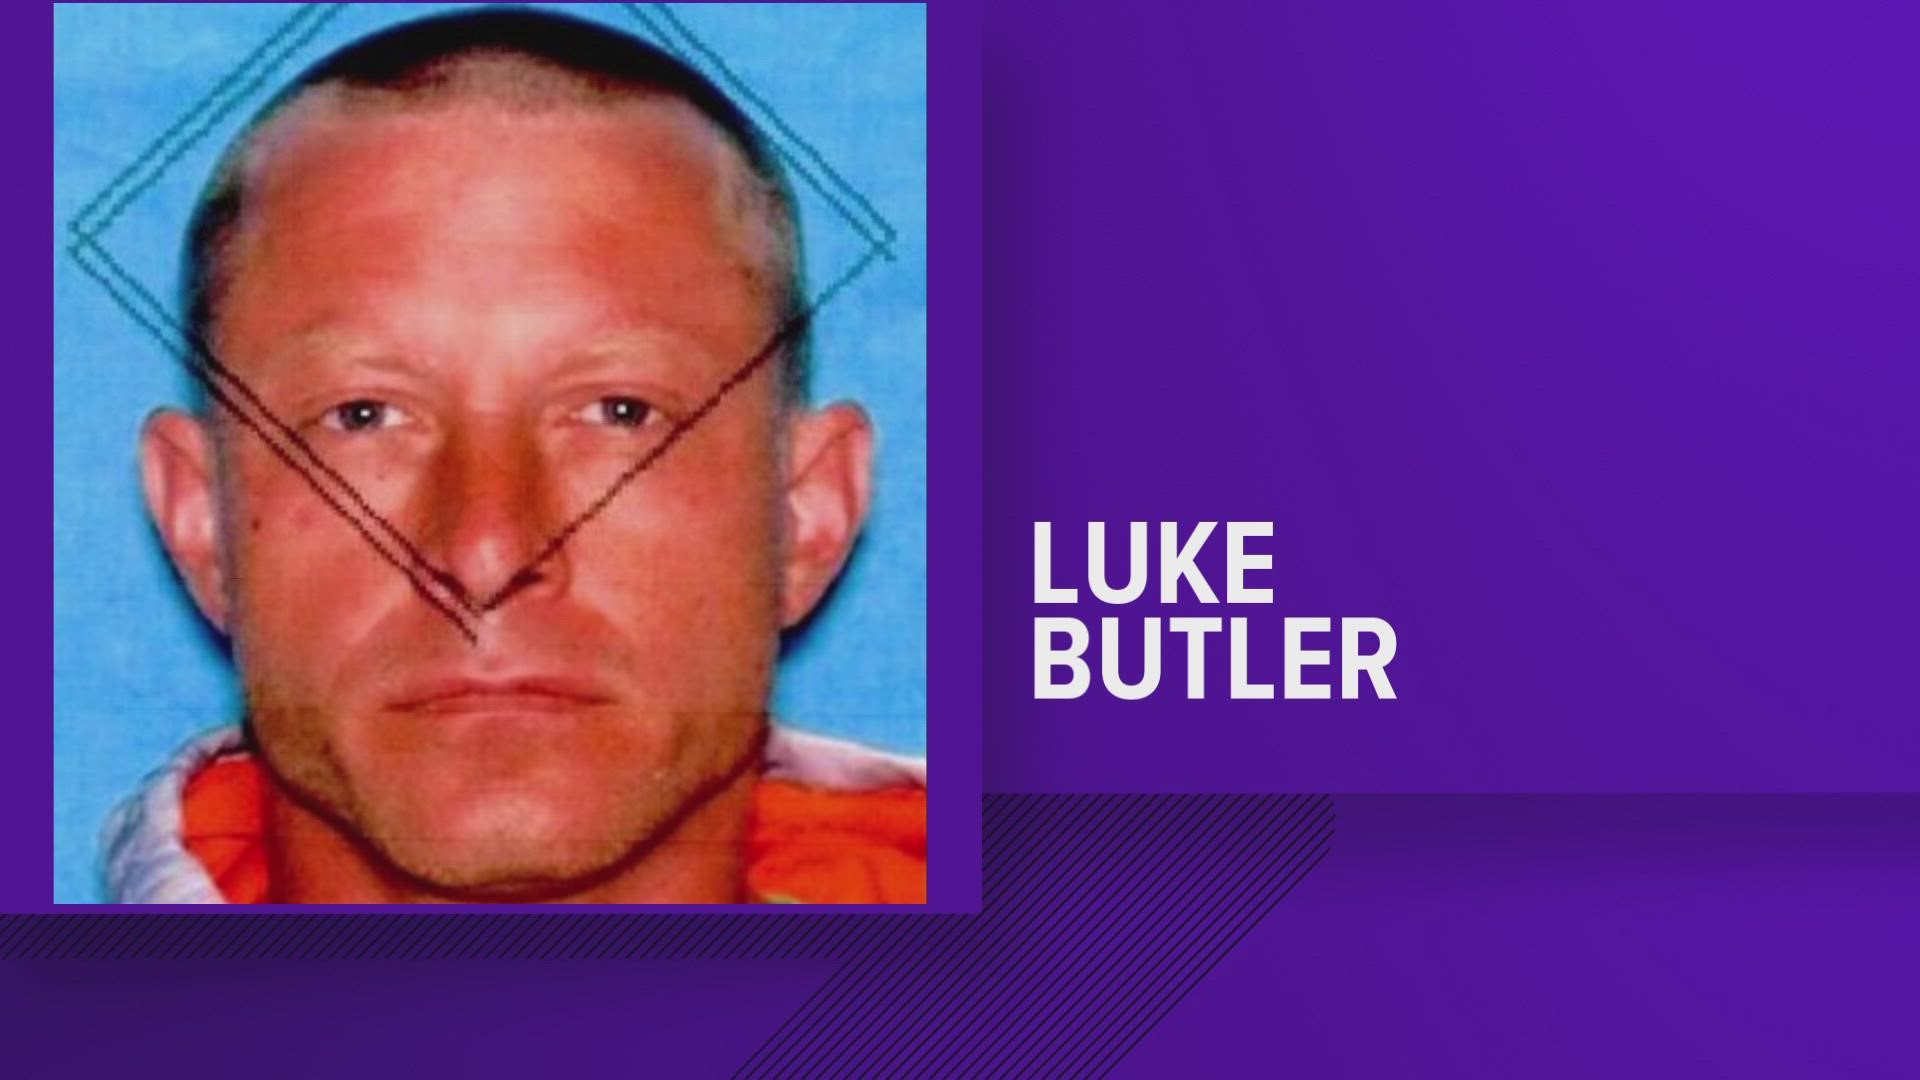 Deputies said Luke Michael "Gator" Butler disappeared in Oct. 2019. A hunter found his remains in a wooded area outside Madisonville three years later.